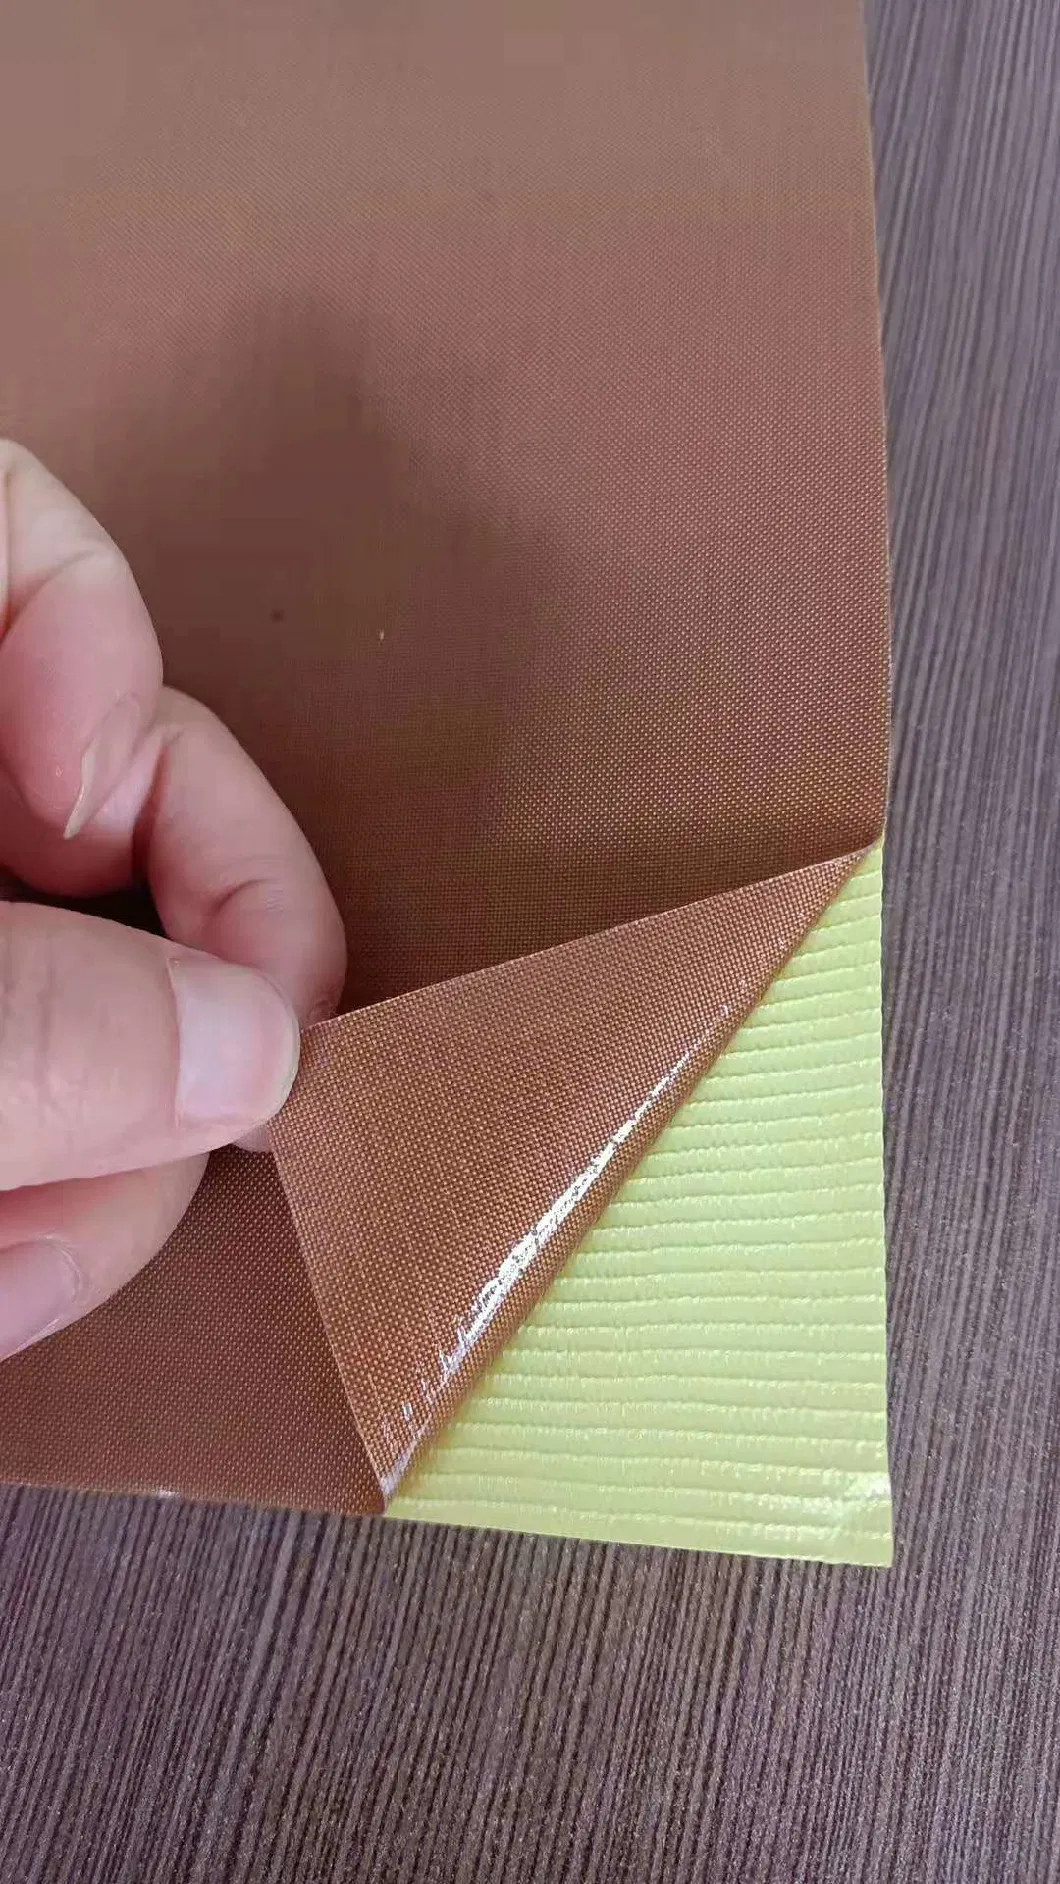 PTFE Coated Heat-Resistant Tape Glass Cloth